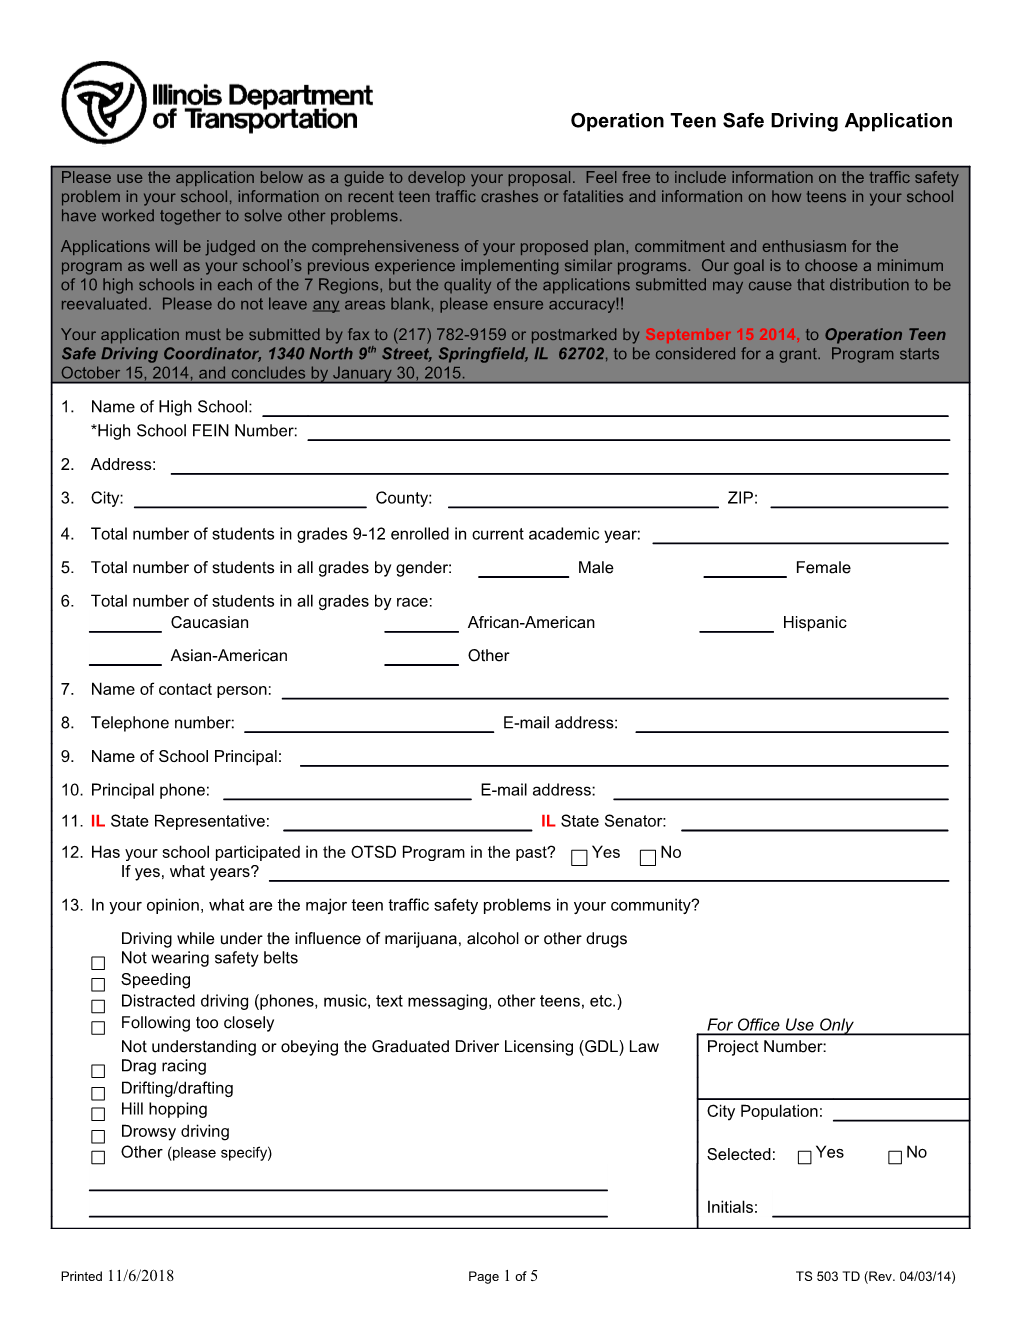 Operation Teen Safe Driving Application